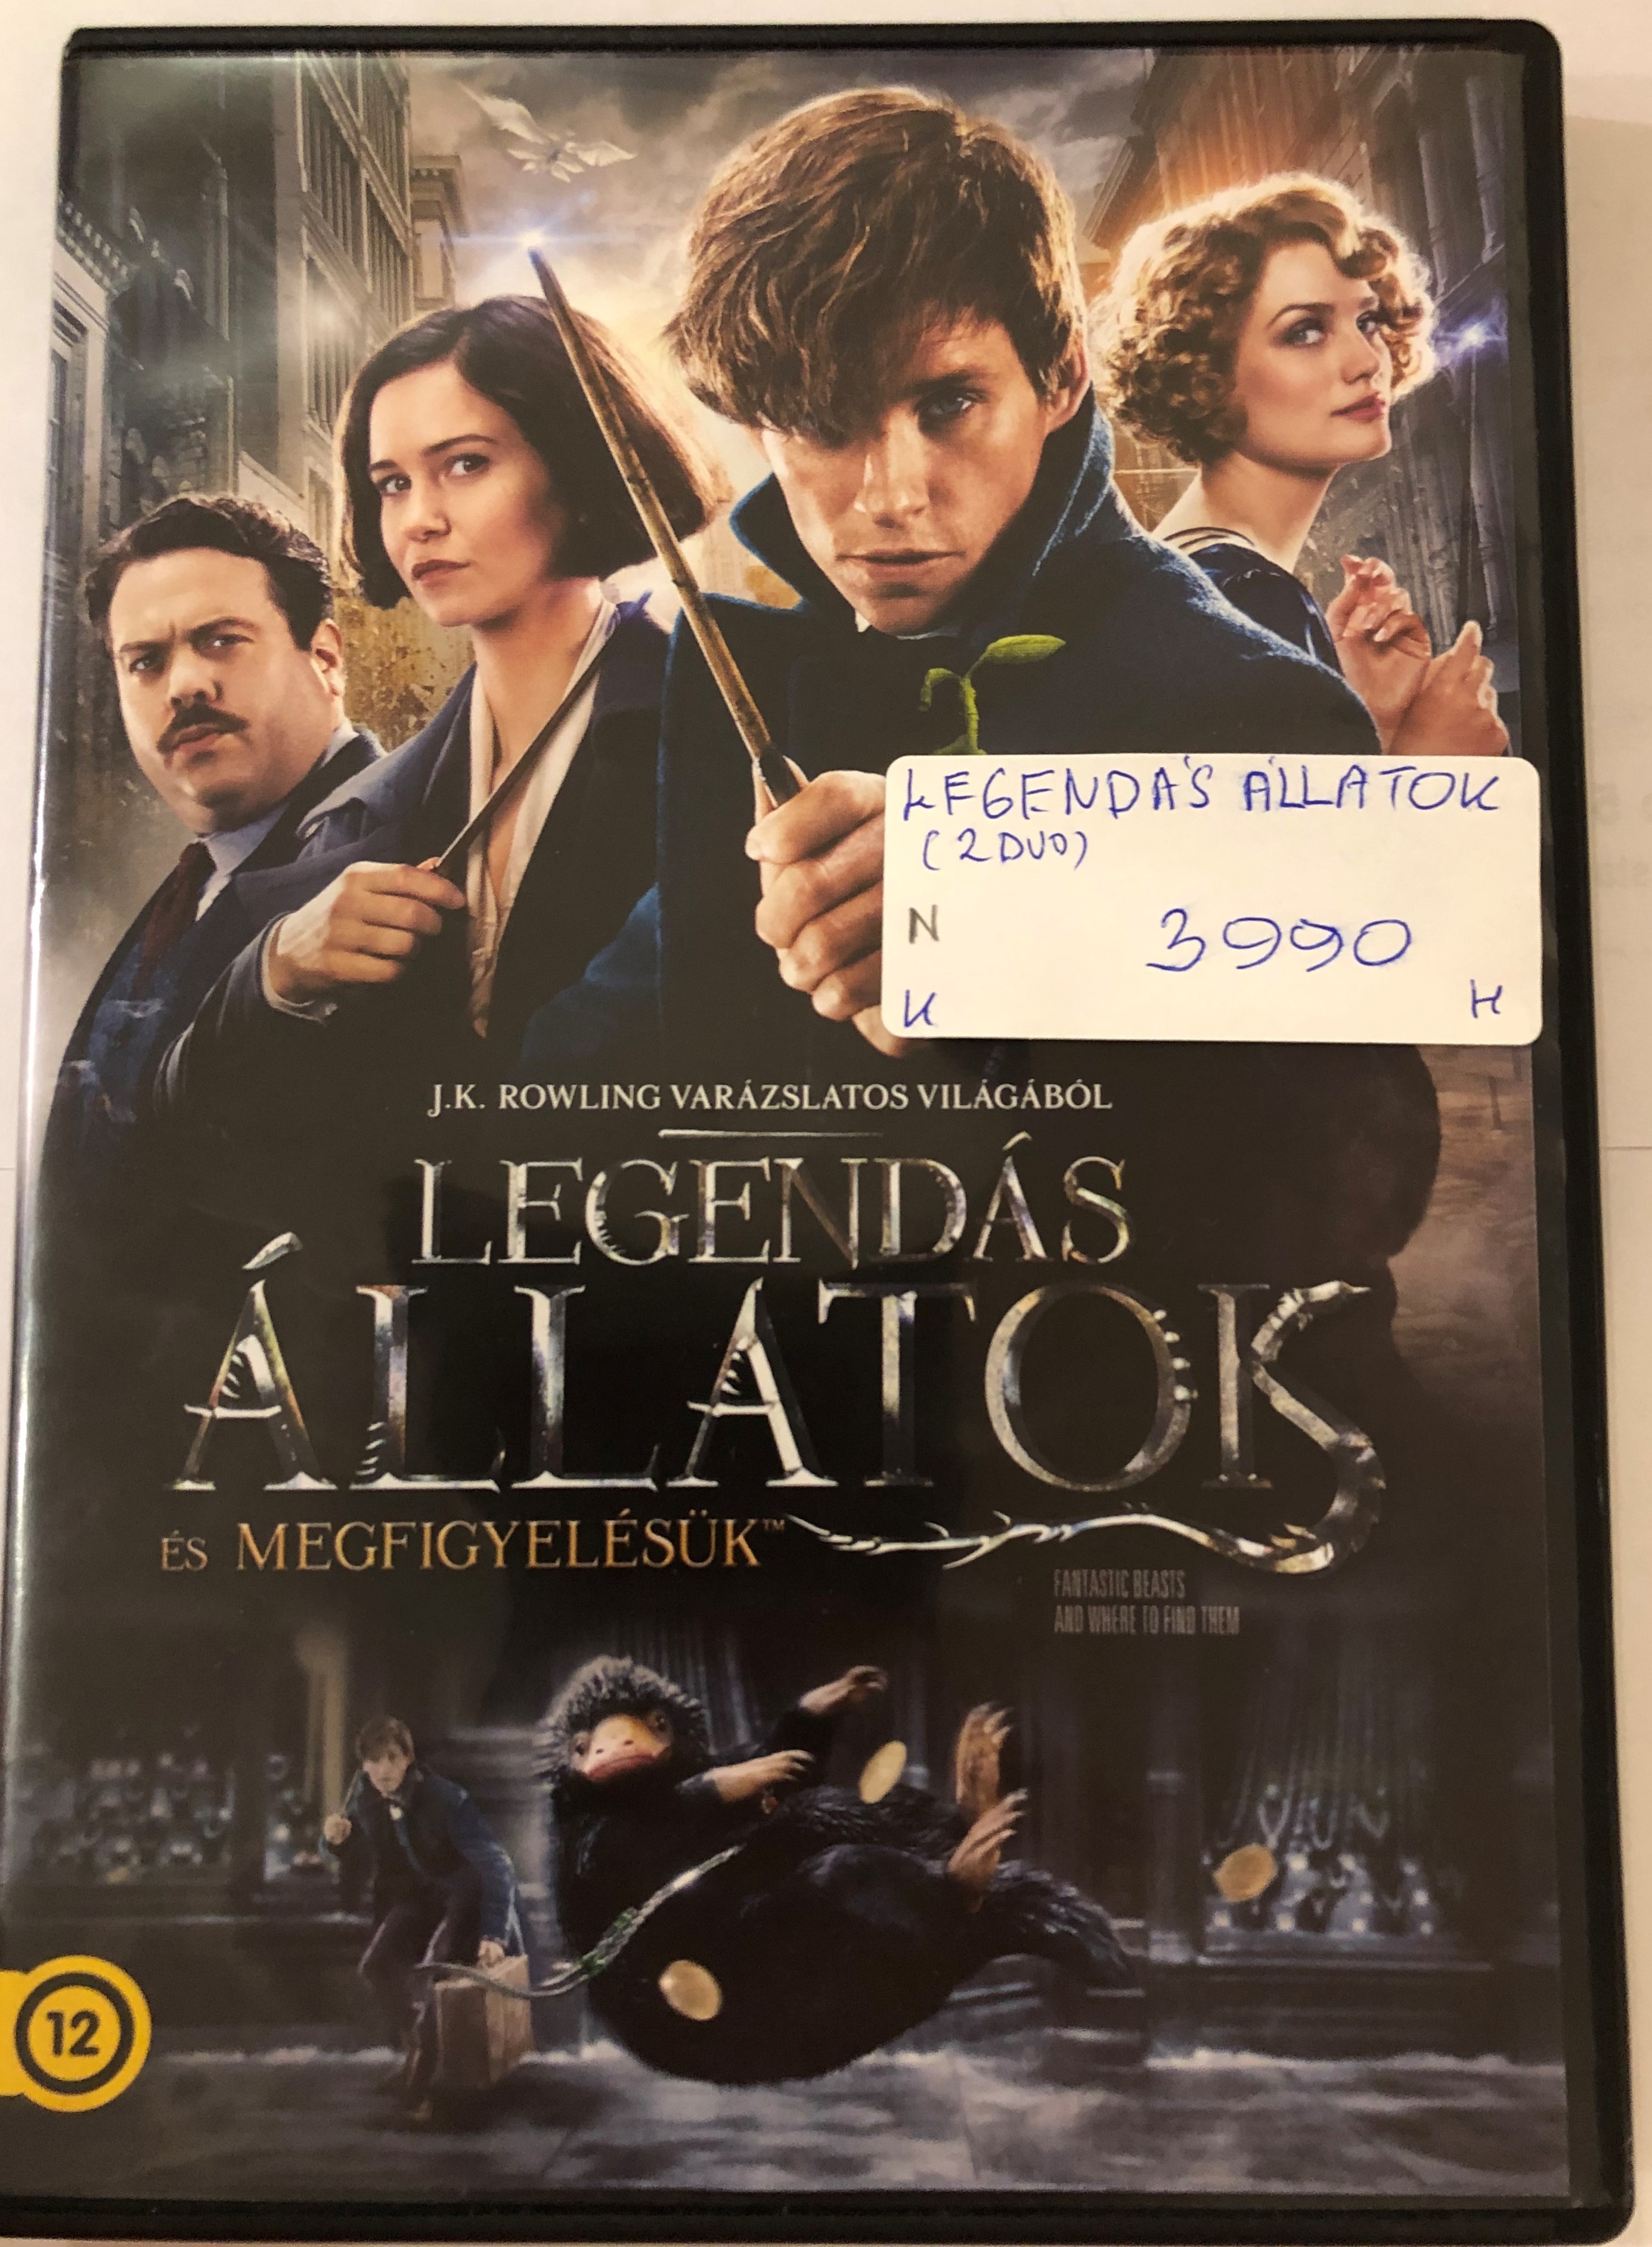 fantastic-beasts-and-where-to-find-them-dvd-2016-legend-s-llatok-s-megfigyel-s-k-directed-by-david-yates-1-.jpg